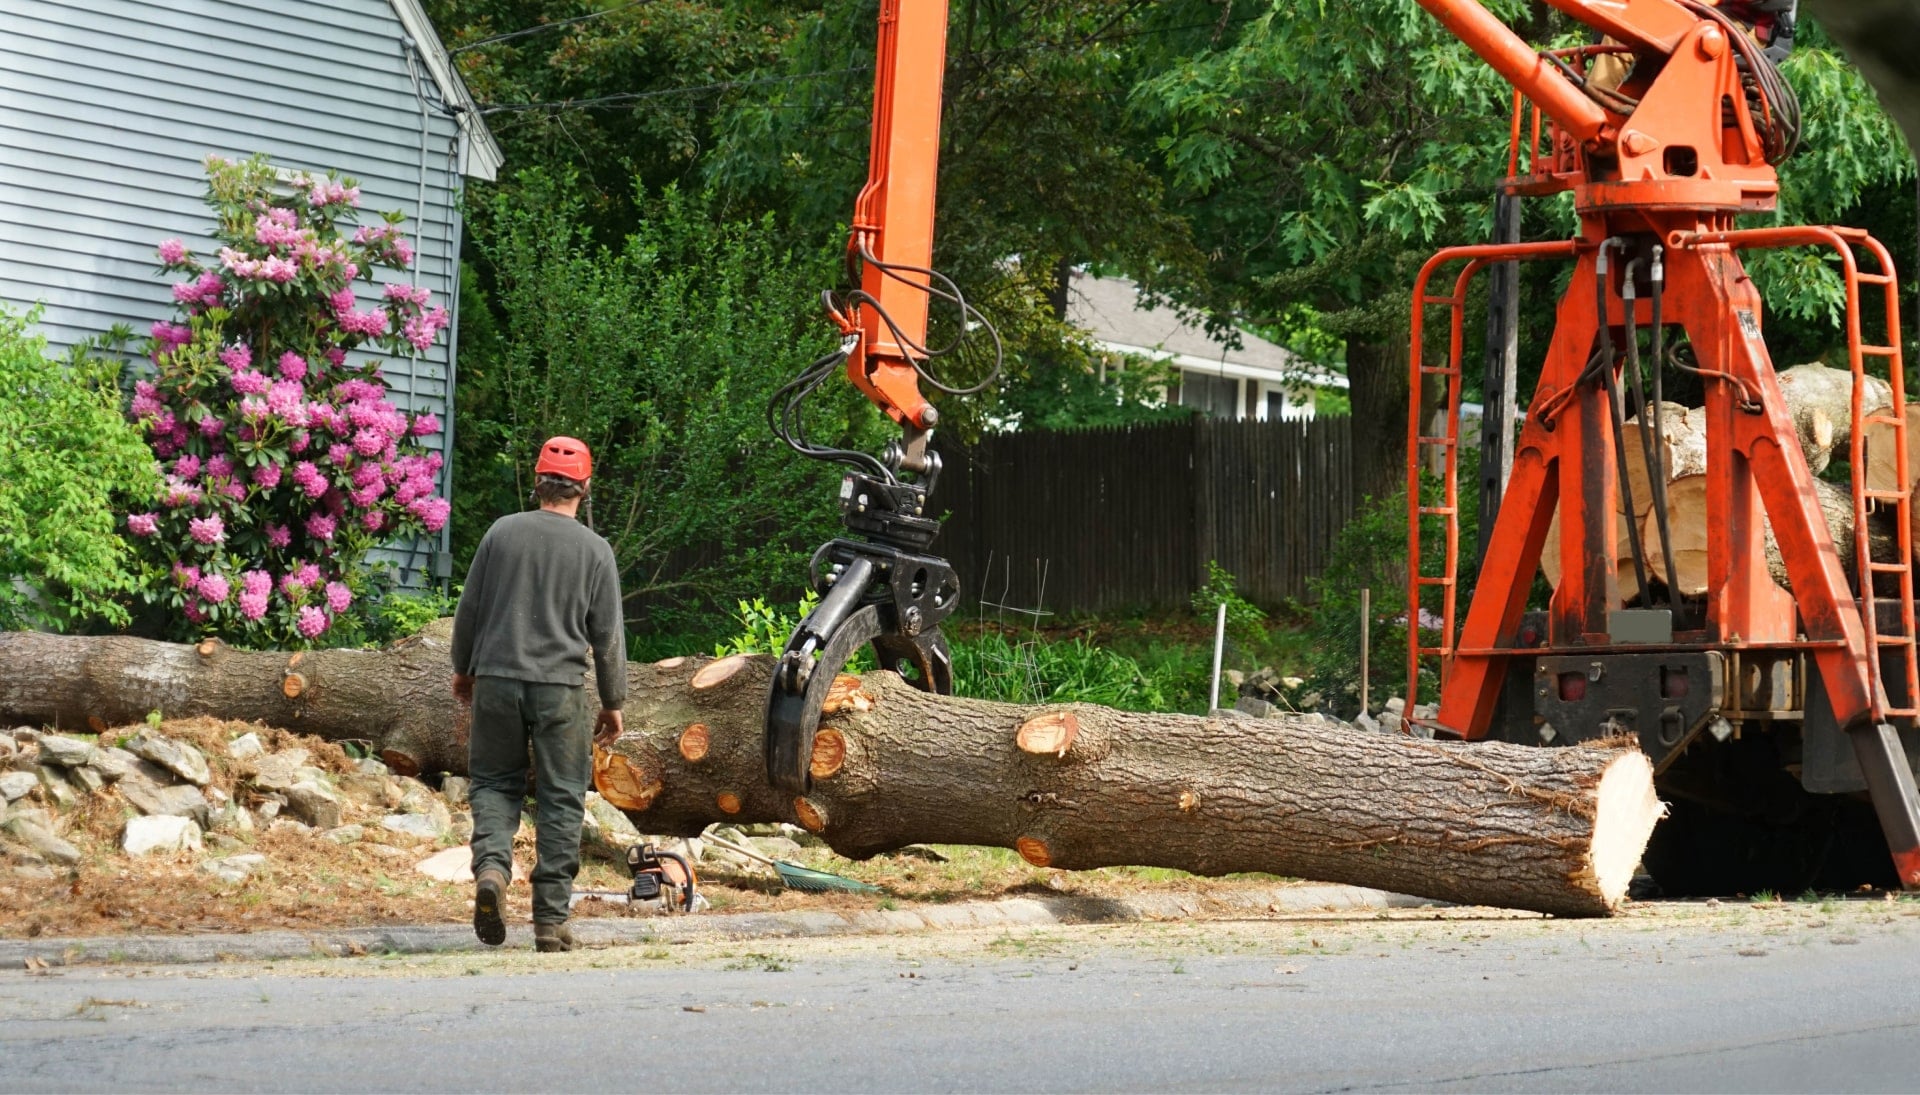 A tree stump has fallen and needs tree removal services in Albany, New York